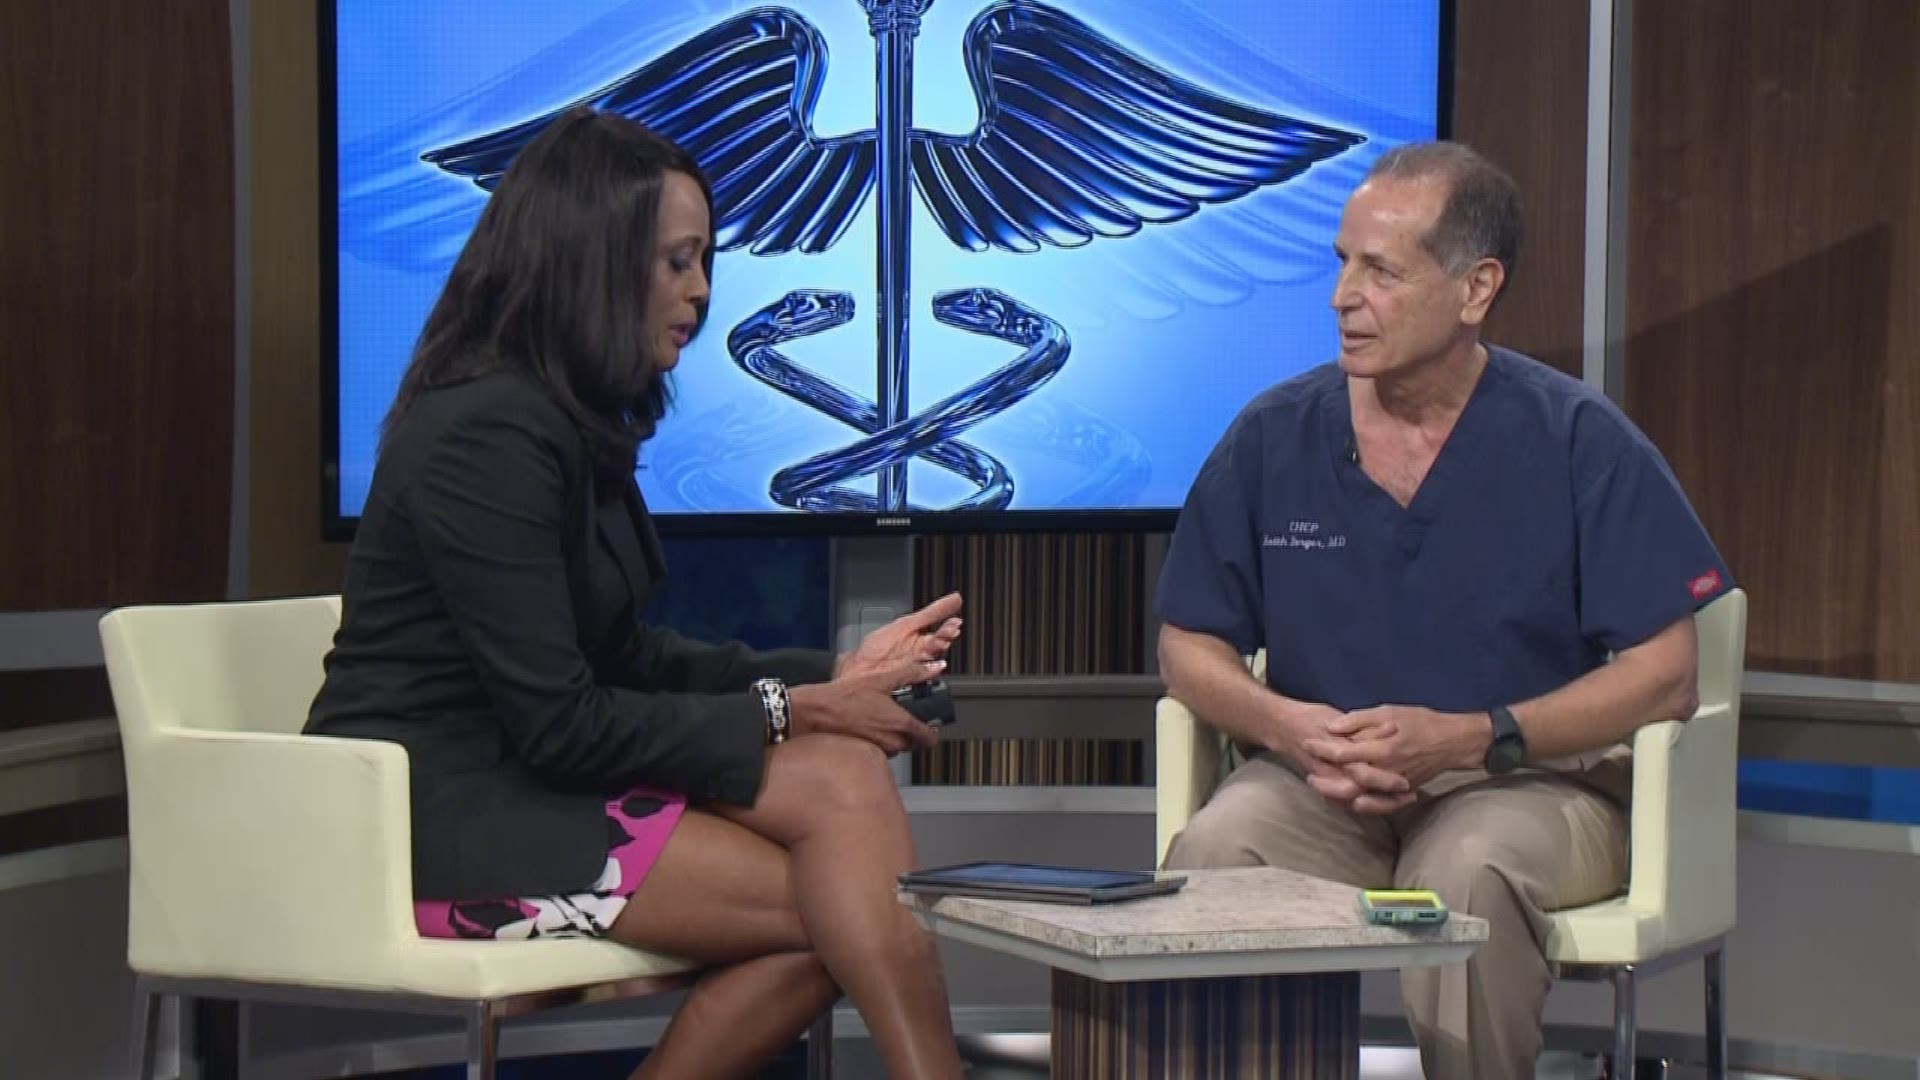 13News Now Regina Mobley sits down with Dr. Keith Berger to discuss colorectal cancer.